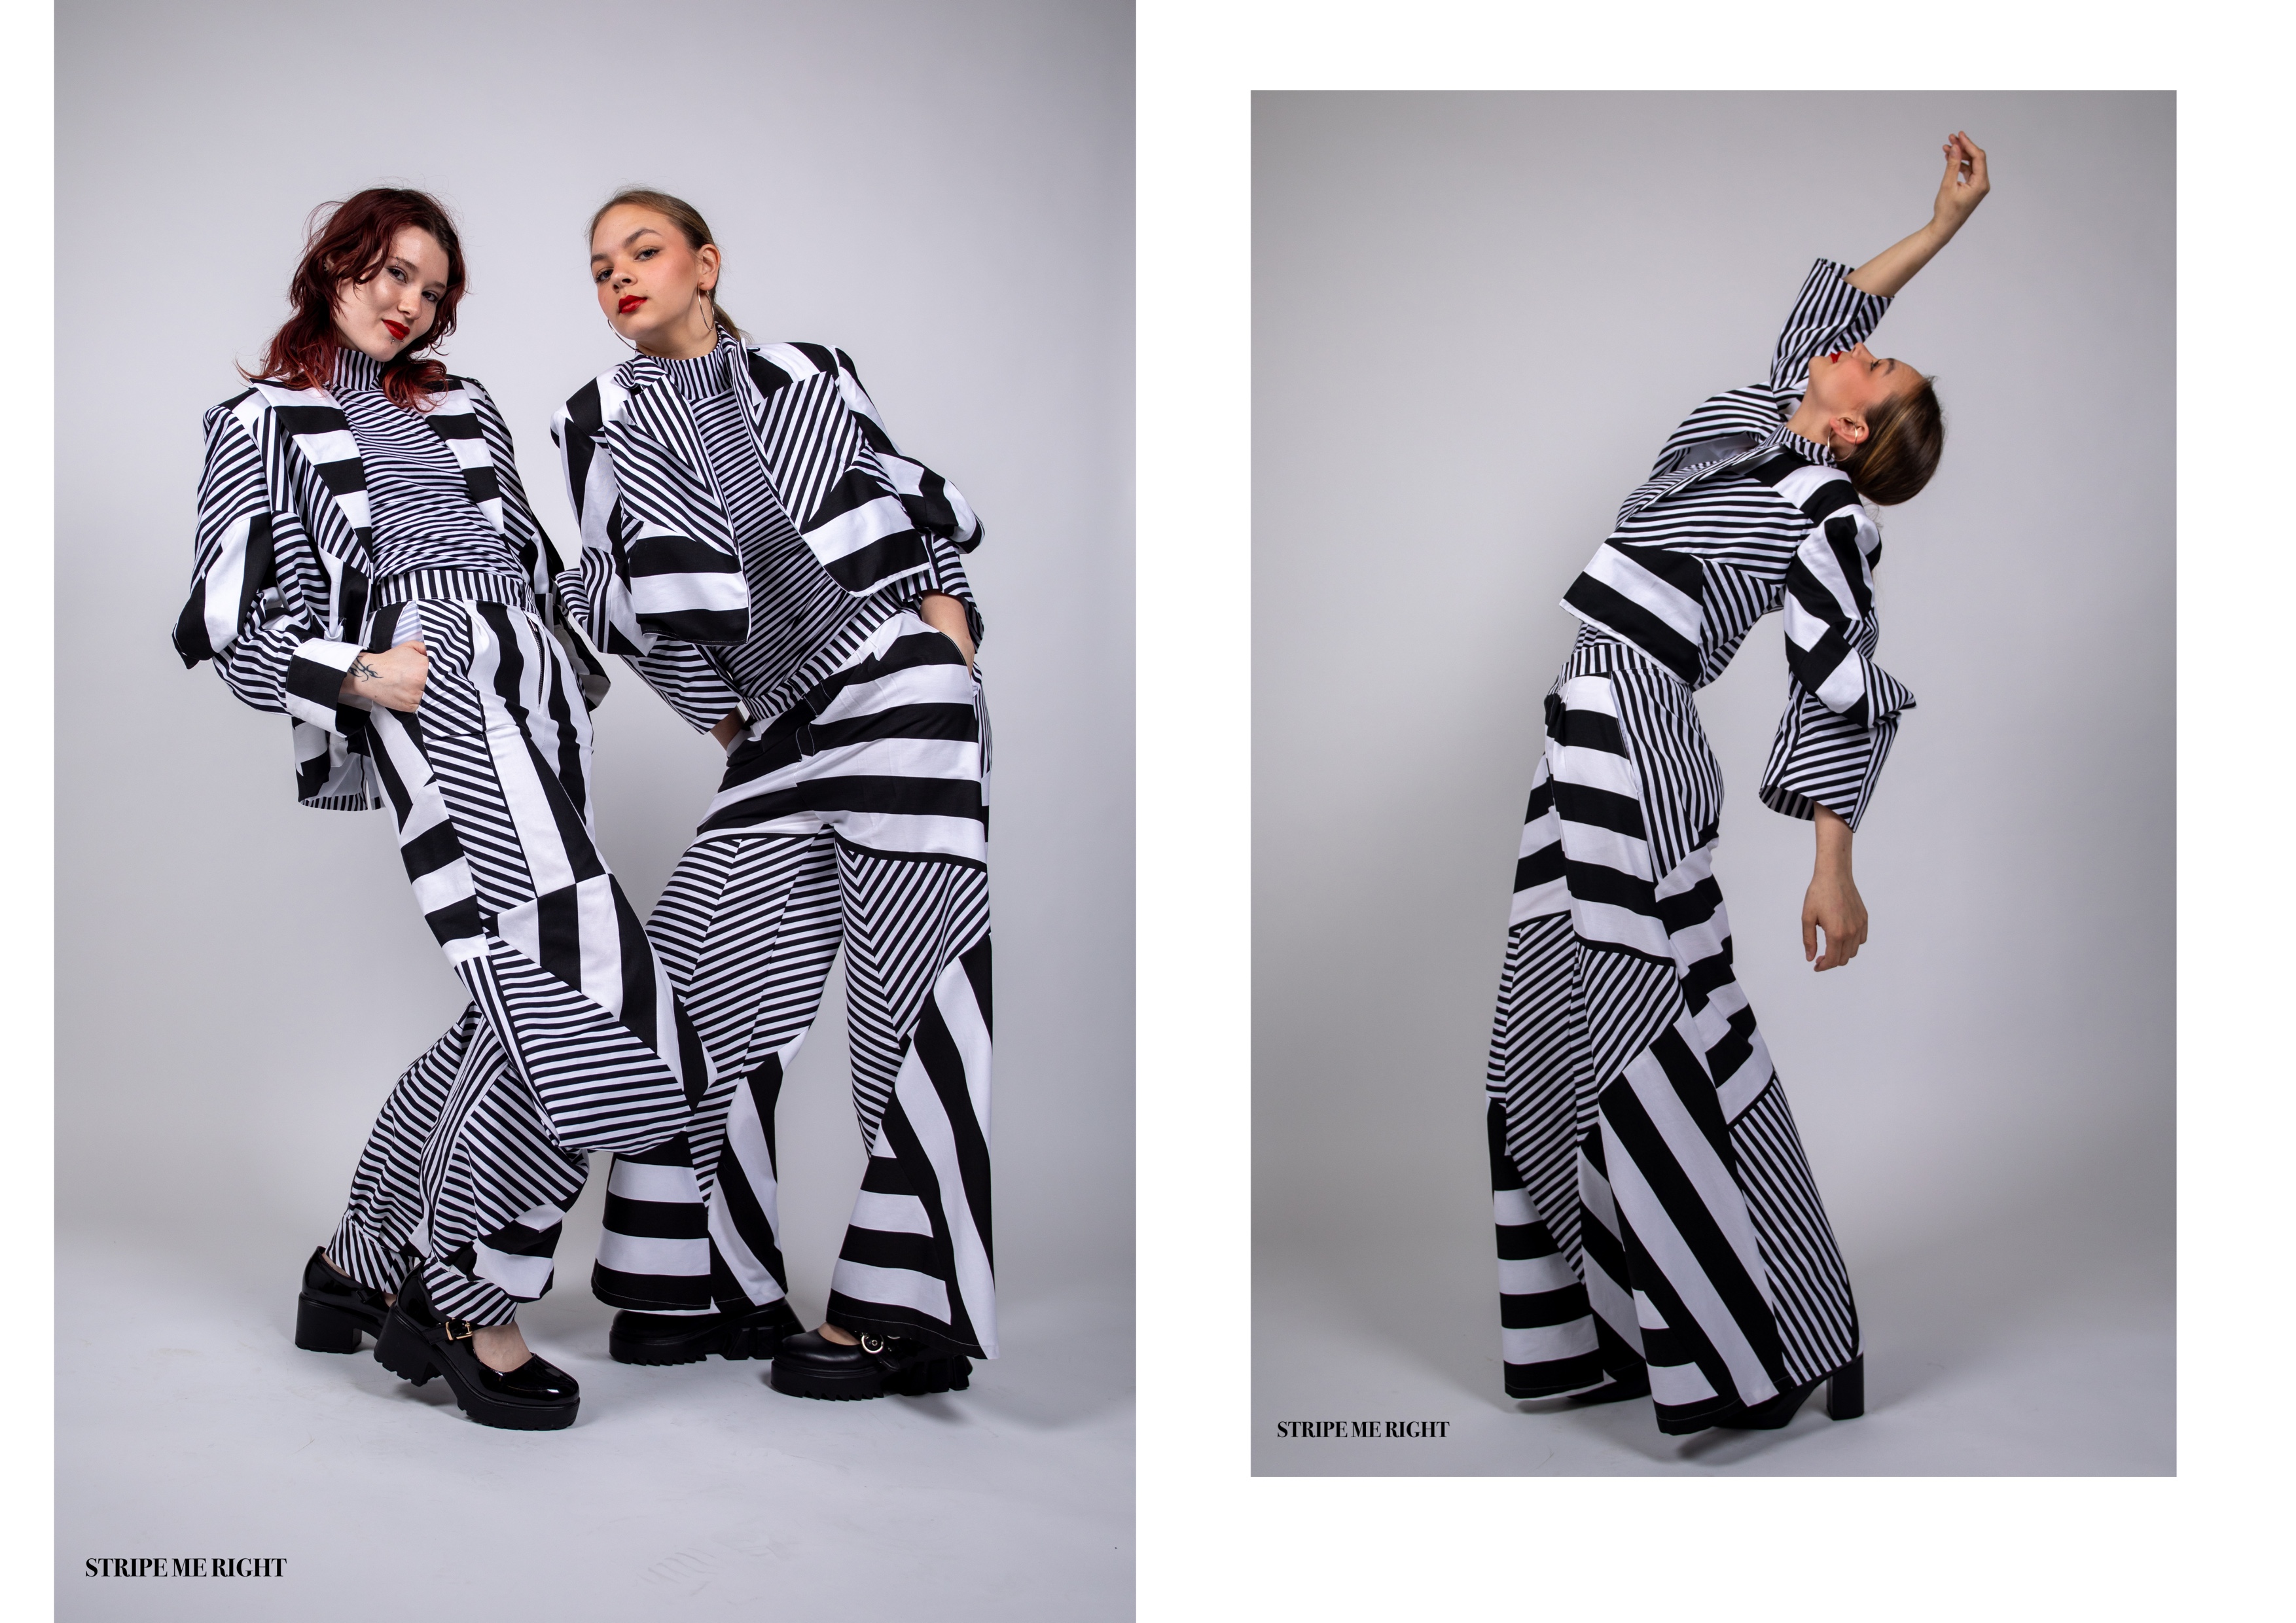 Photo of two female models wearing black and white striped trouser suits, next to photo of one model in same suit bending backwards